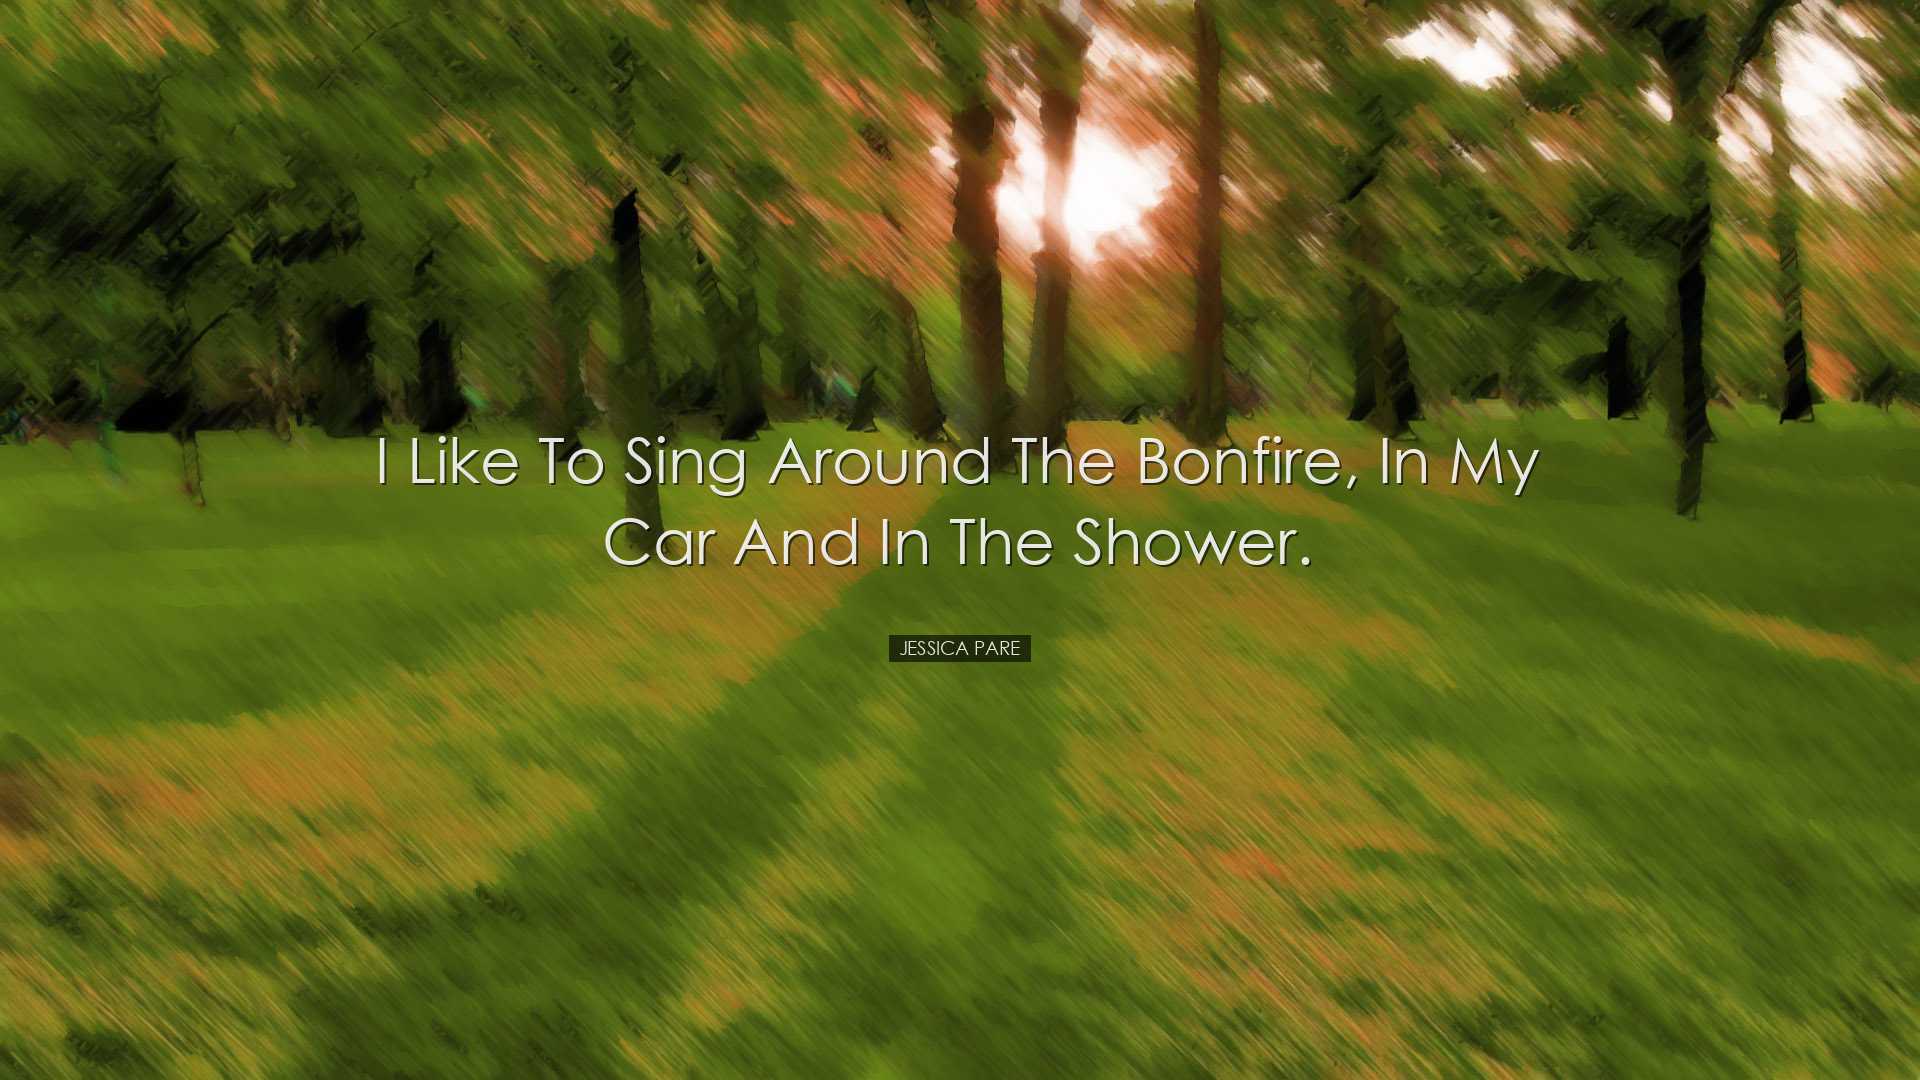 I like to sing around the bonfire, in my car and in the shower. -